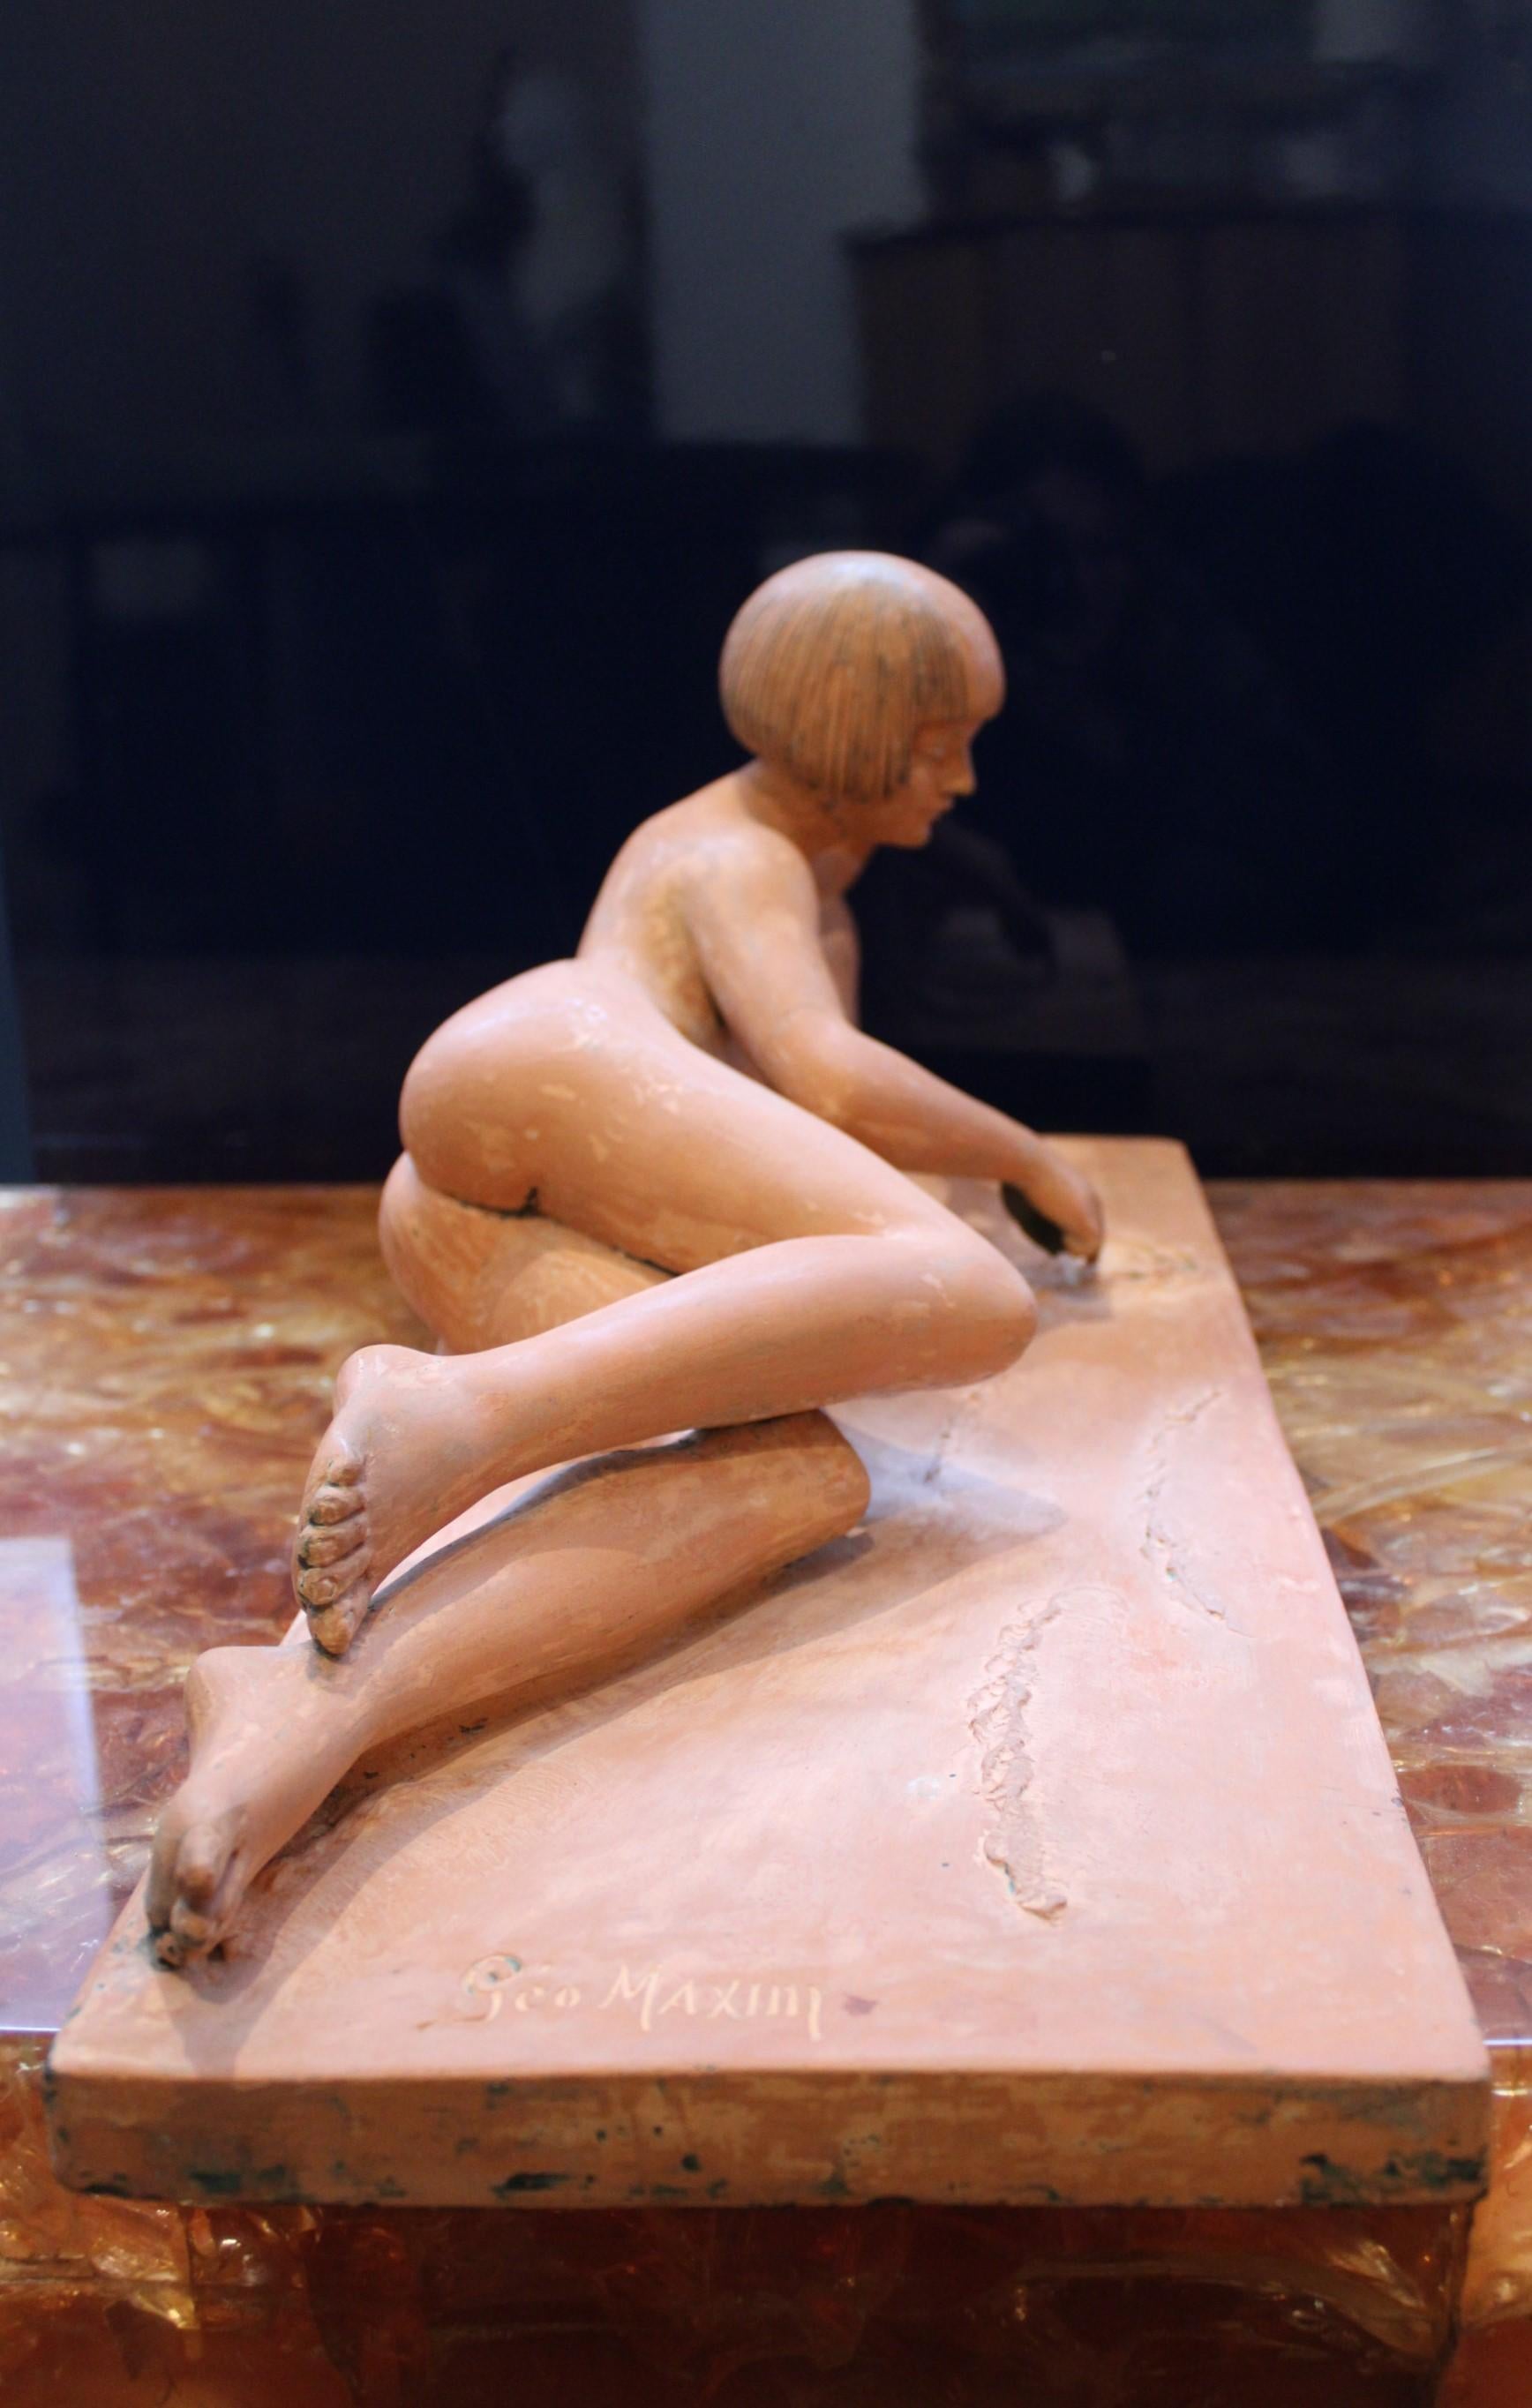 Terracotta Nude Woman Sculpture by George Maxim, France, 20th Century For Sale 6